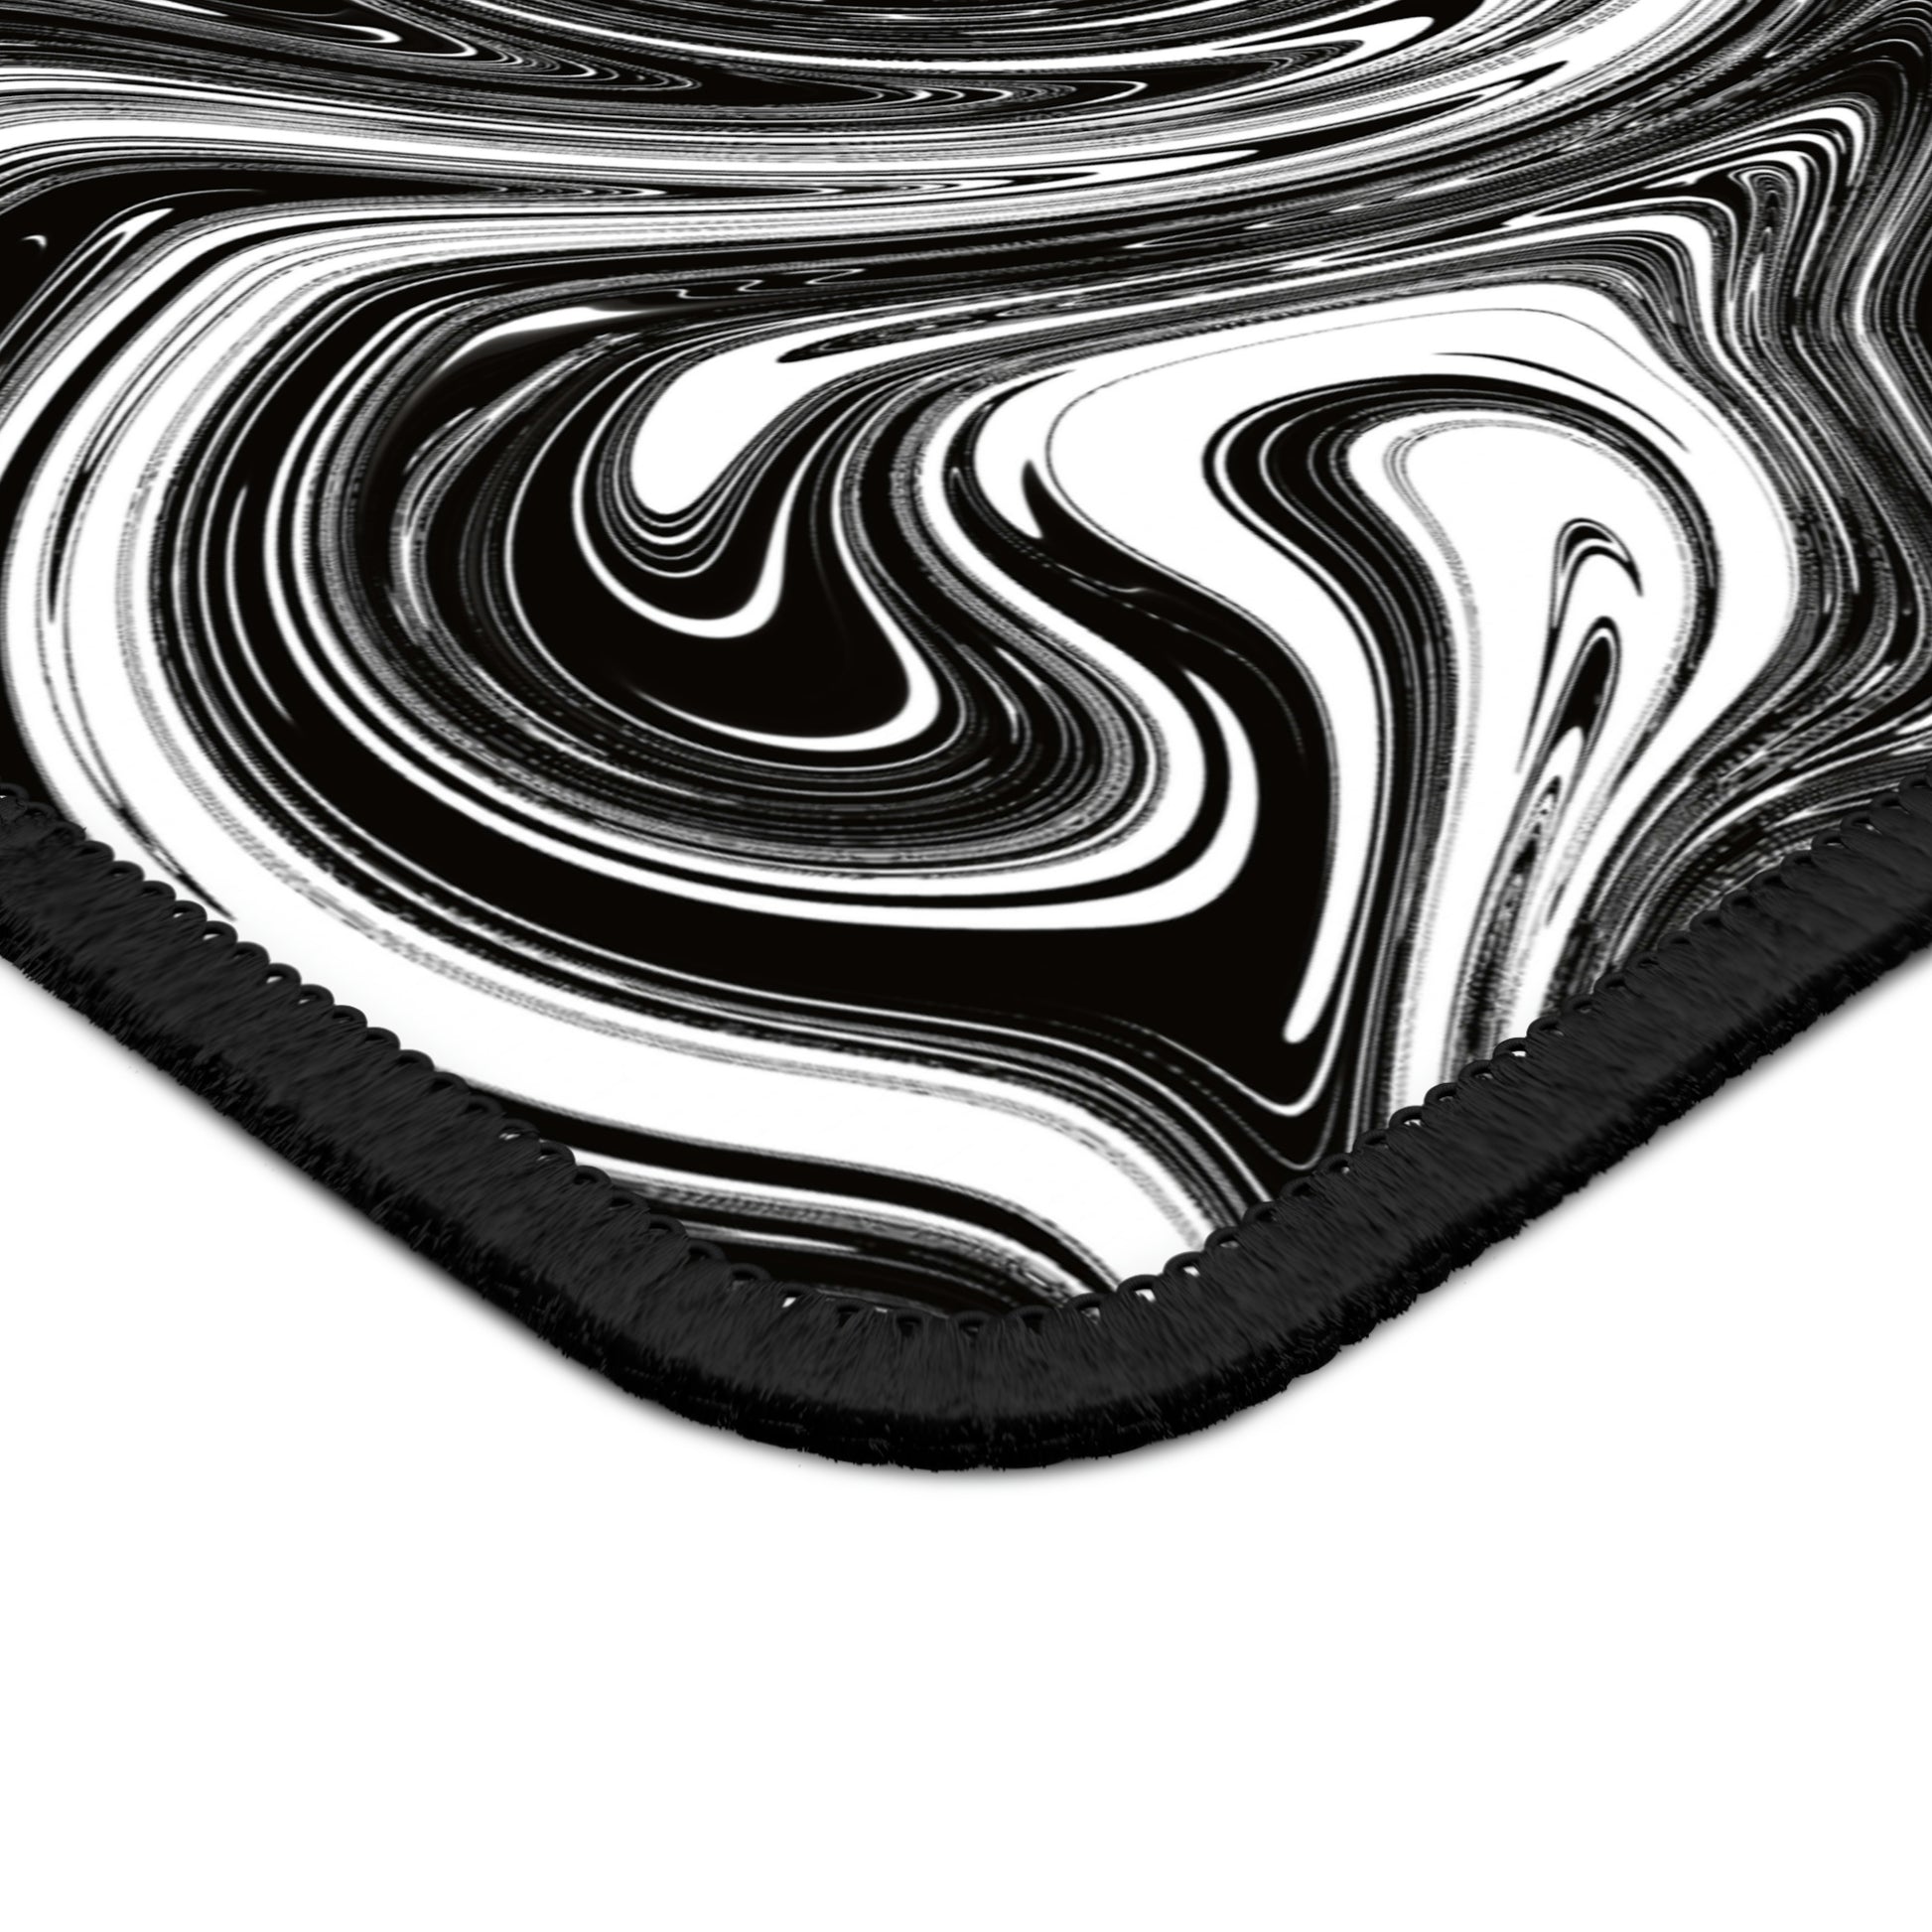 The corner of a gaming mouse pad with black and white swirls.